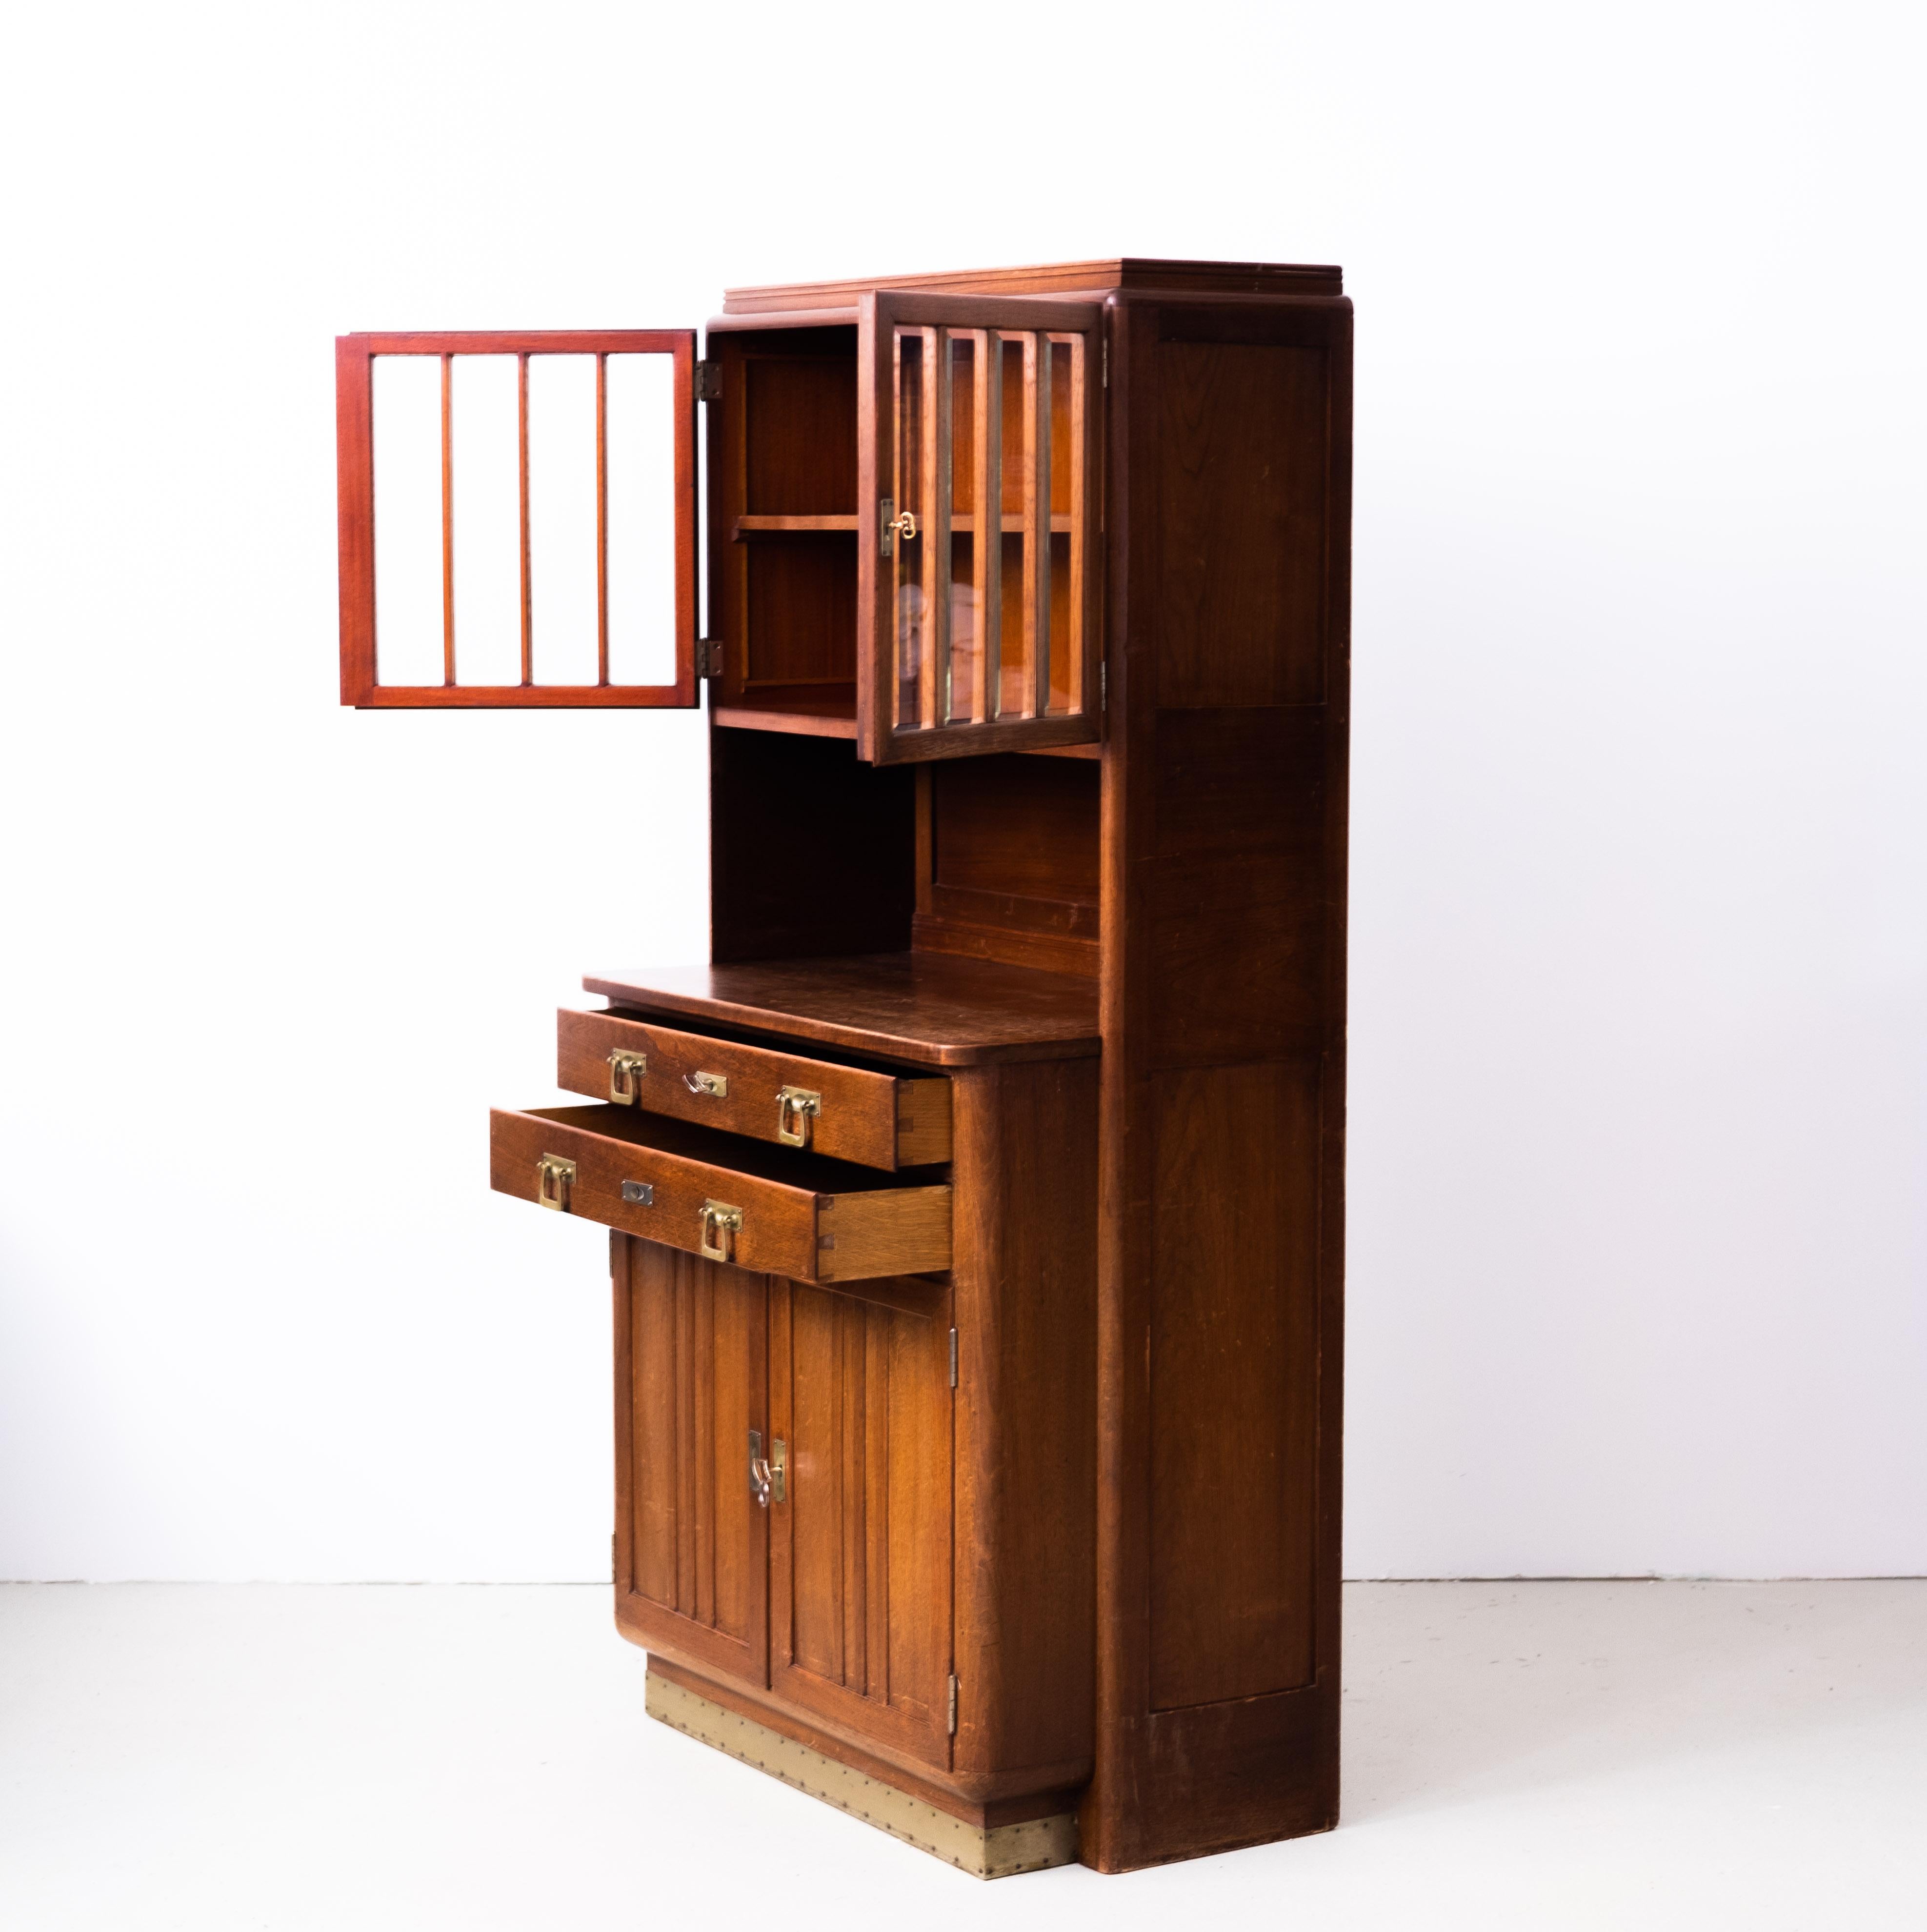 Secessionistic Buffet by Otto Wytrlik, ex. by August Ungethüm (Vienna, 1905 For Sale 1